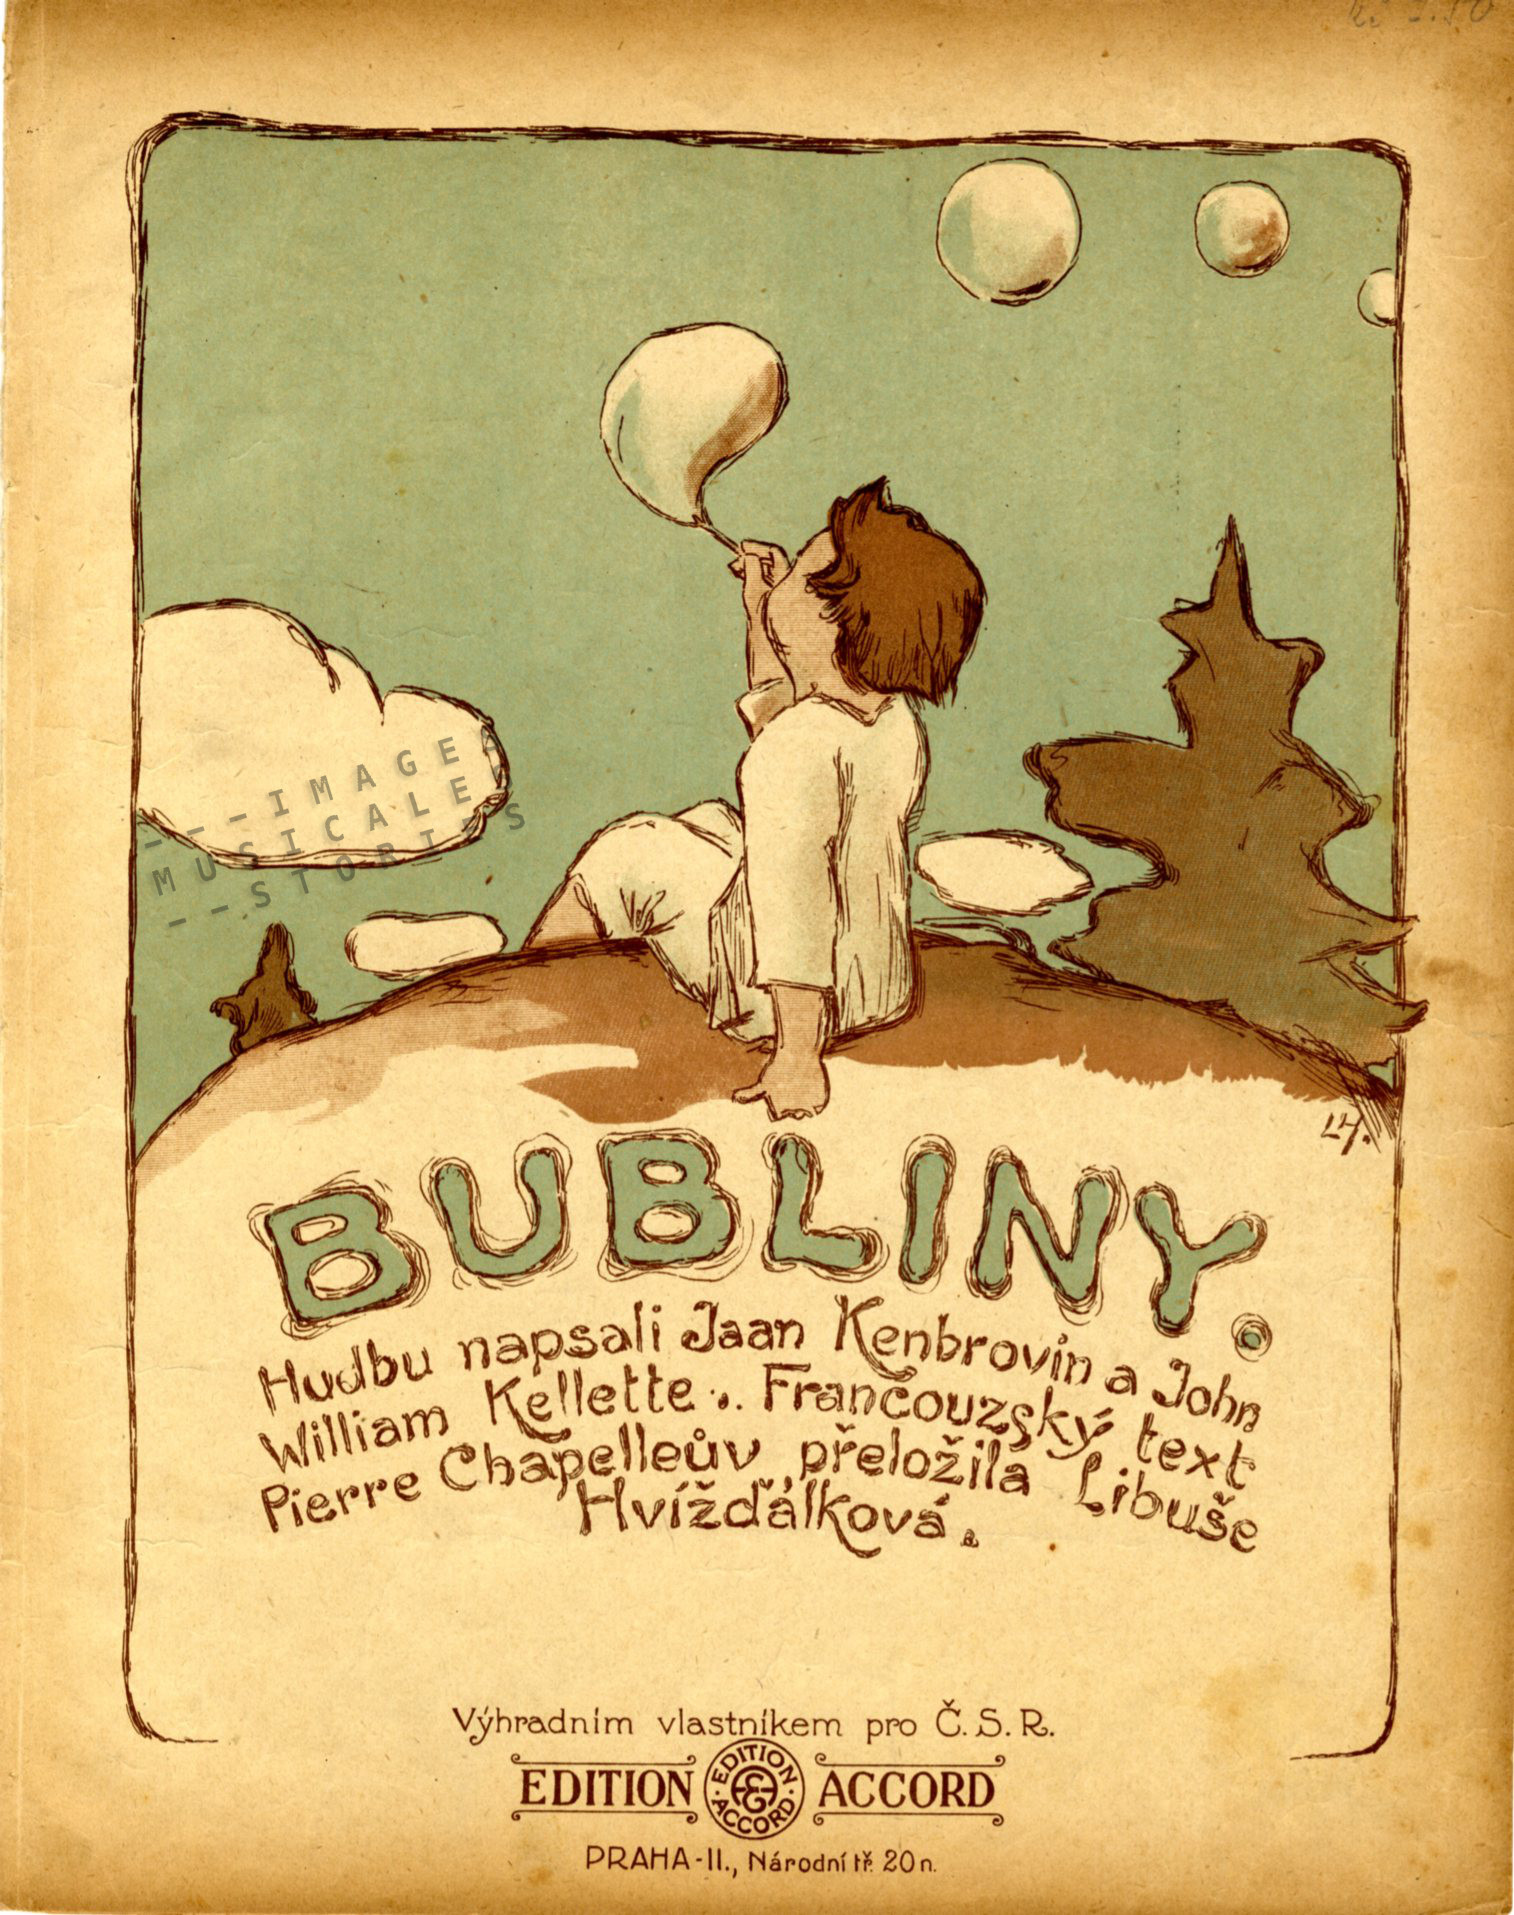 Czech sheet music cover for 'Bubliny'